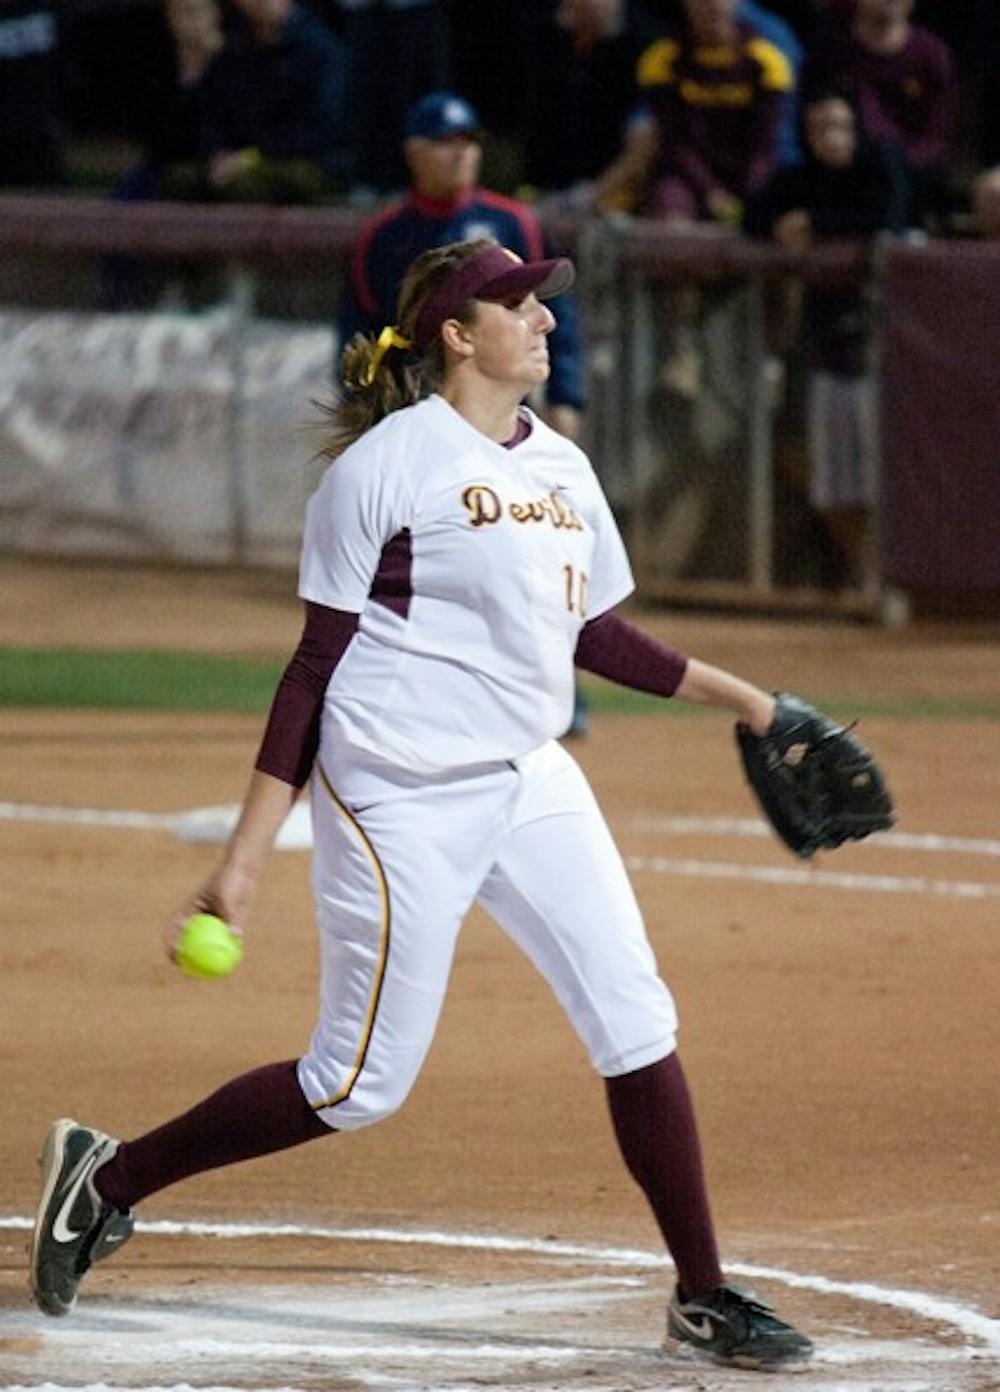 ASU junior Hillary Bach delivers a pitch during a game last season. The Sun Devils swept Michigan State over the weekend, giving up only six runs in three games. (Photo by Scott Stuk)